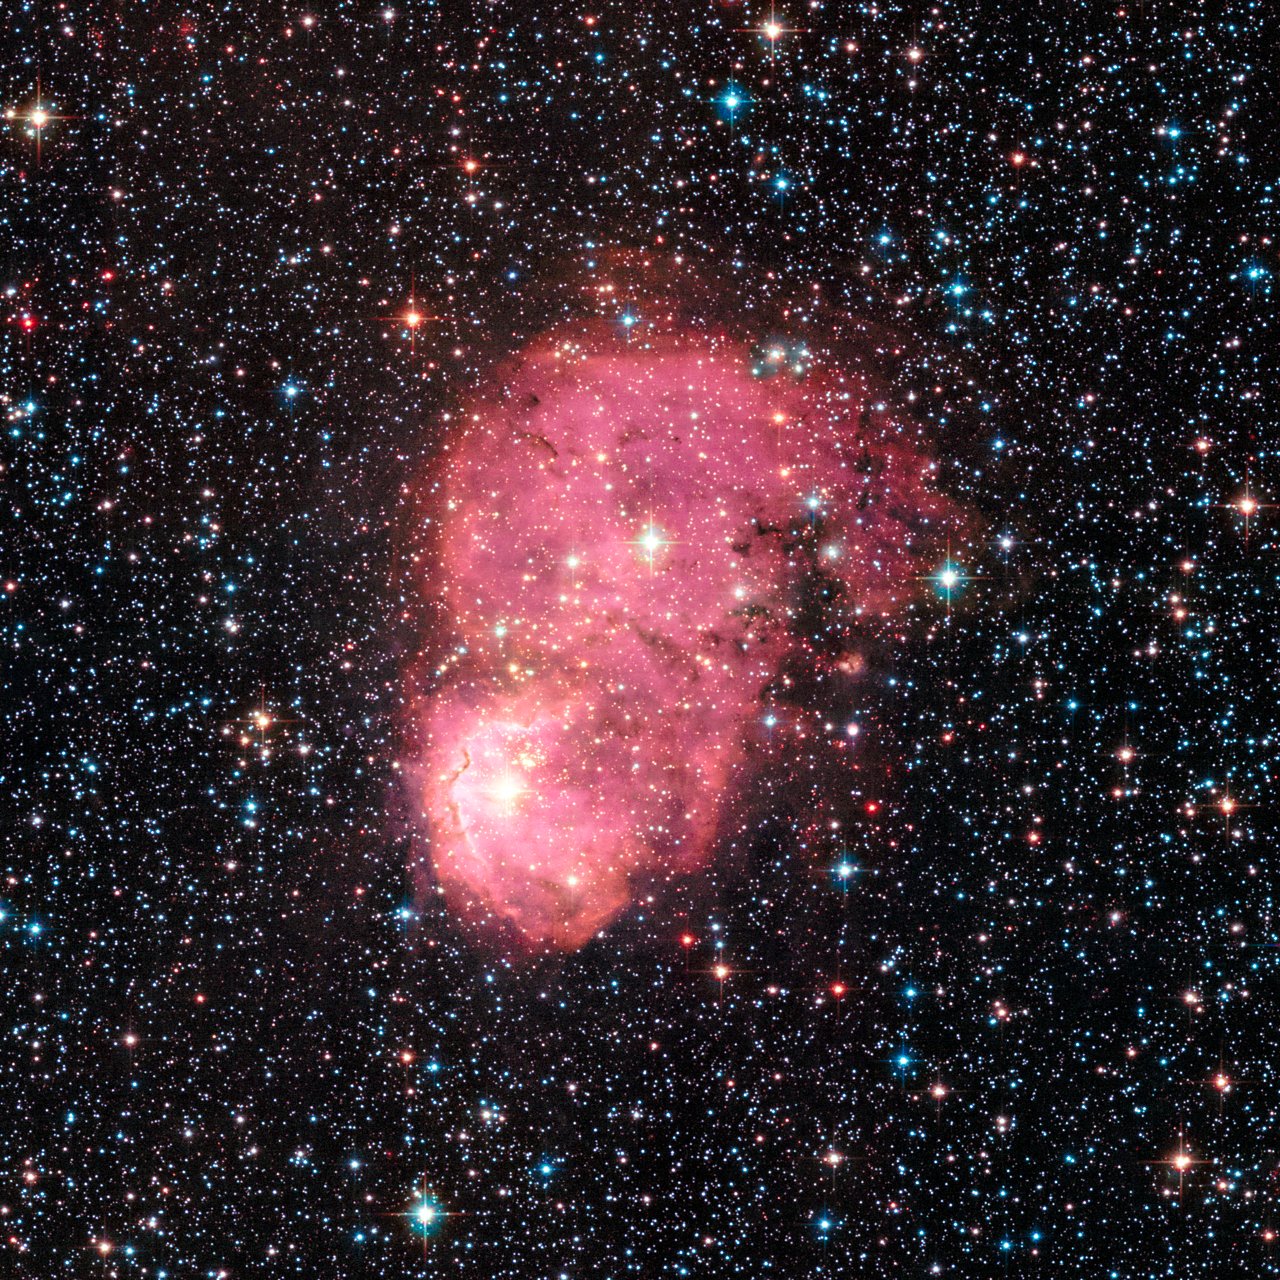 This glowing nebula, named NGC 248, is located within the Small Magellanic Cloud, a satellite galaxy of the Milky Way and about 200 000 light-years from Earth. The nebula was observed with Hubble’s Advanced Camera for Surveys in September 2015, as part of a survey called the Small Magellanic cloud Investigation of Dust and Gas Evolution (SMIDGE).